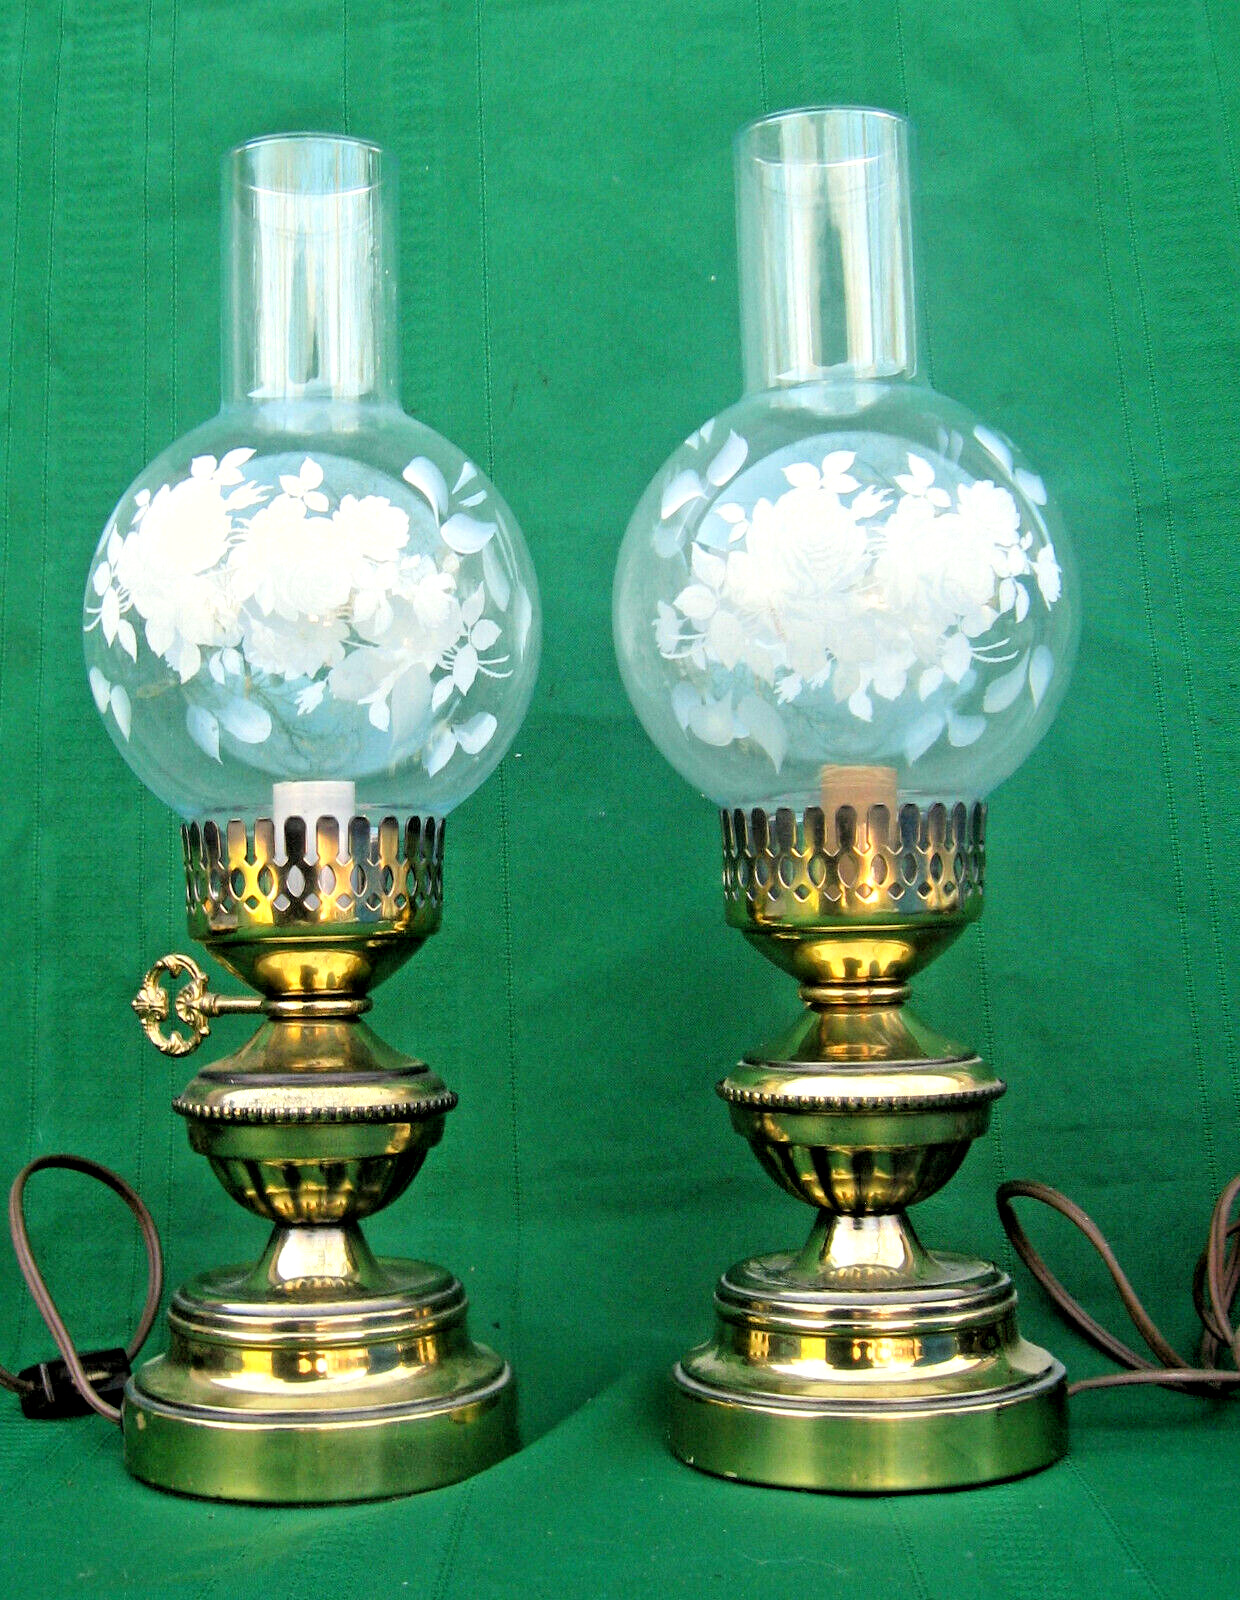 Pair of Antique Style Brass Lamps w/ White Rose Painted Glass Shades